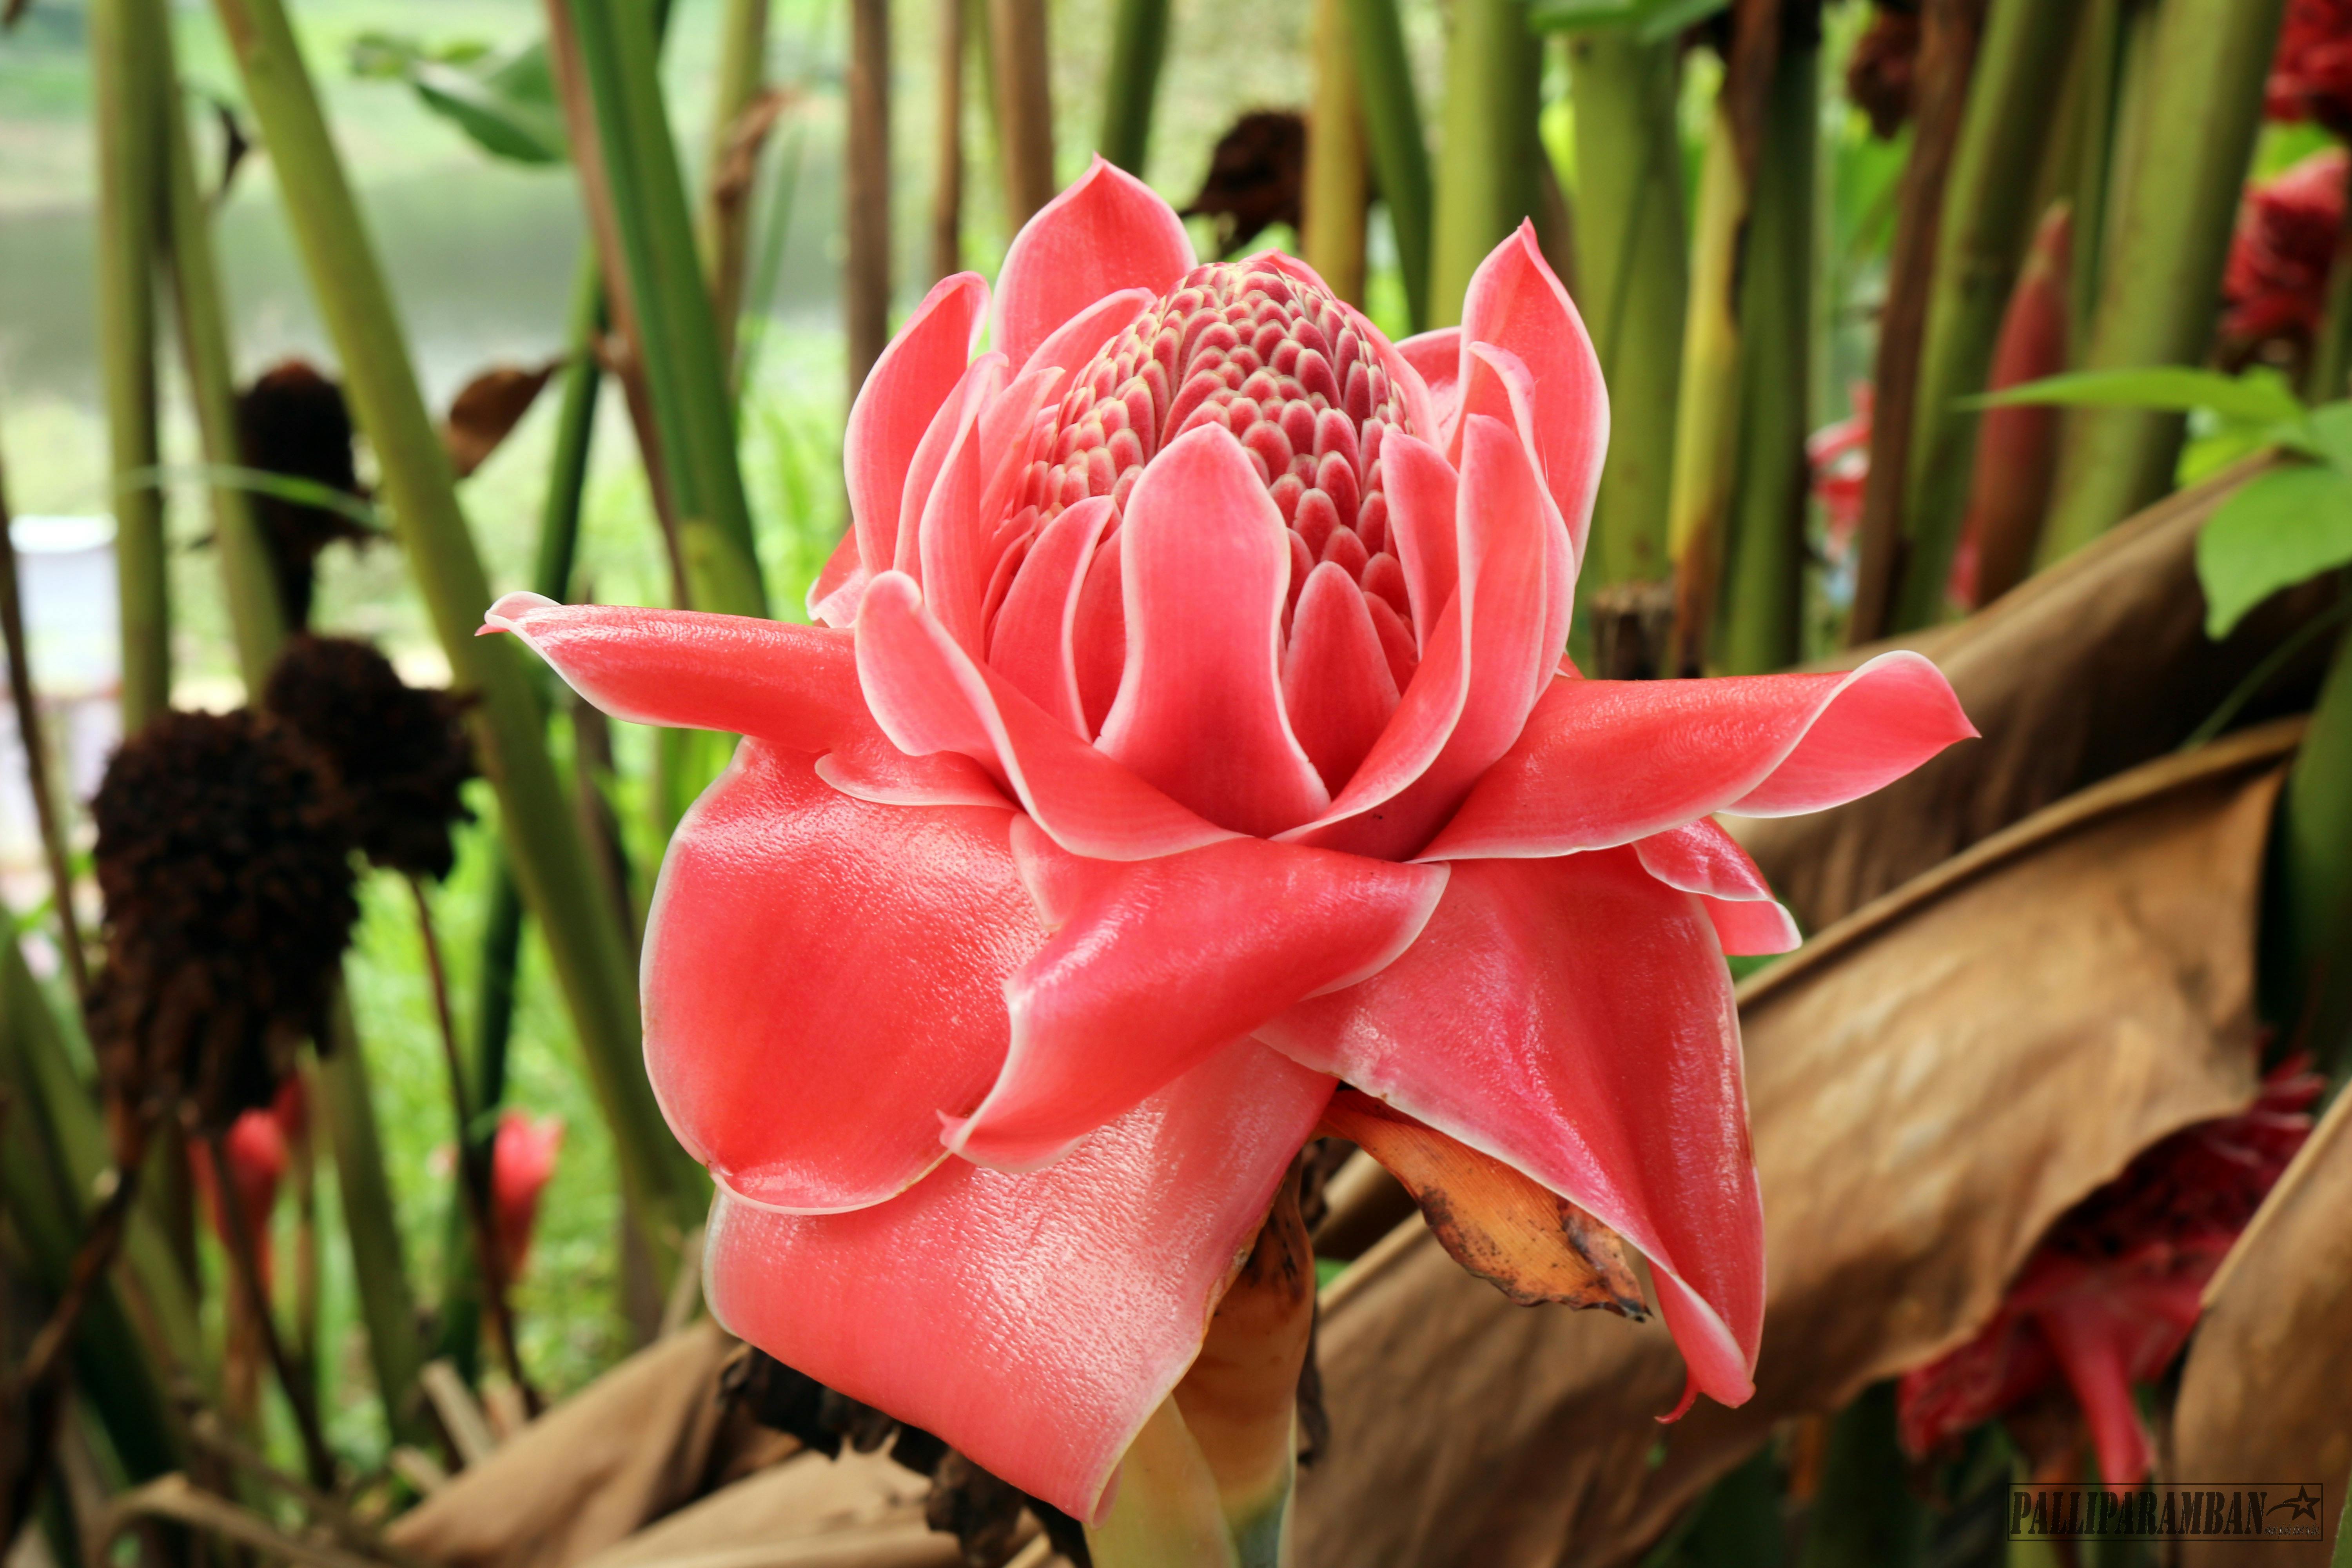  Red Torch Ginger  Flower  Free Stock Photo